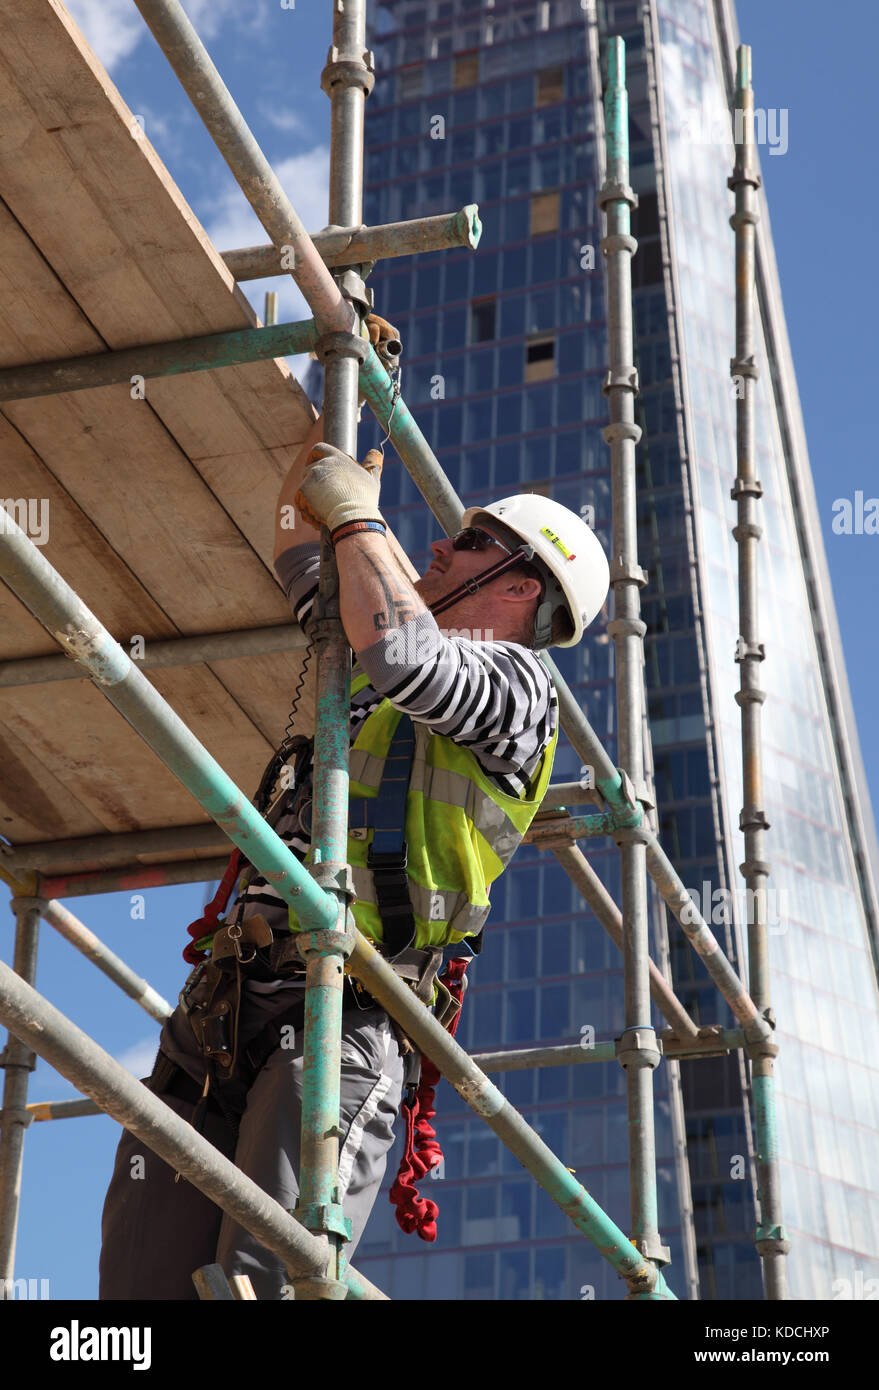 A scaffolder erects a temporary work platform on a tower block high above London. Shows safety harness in use. The Shard is in the background. Stock Photo